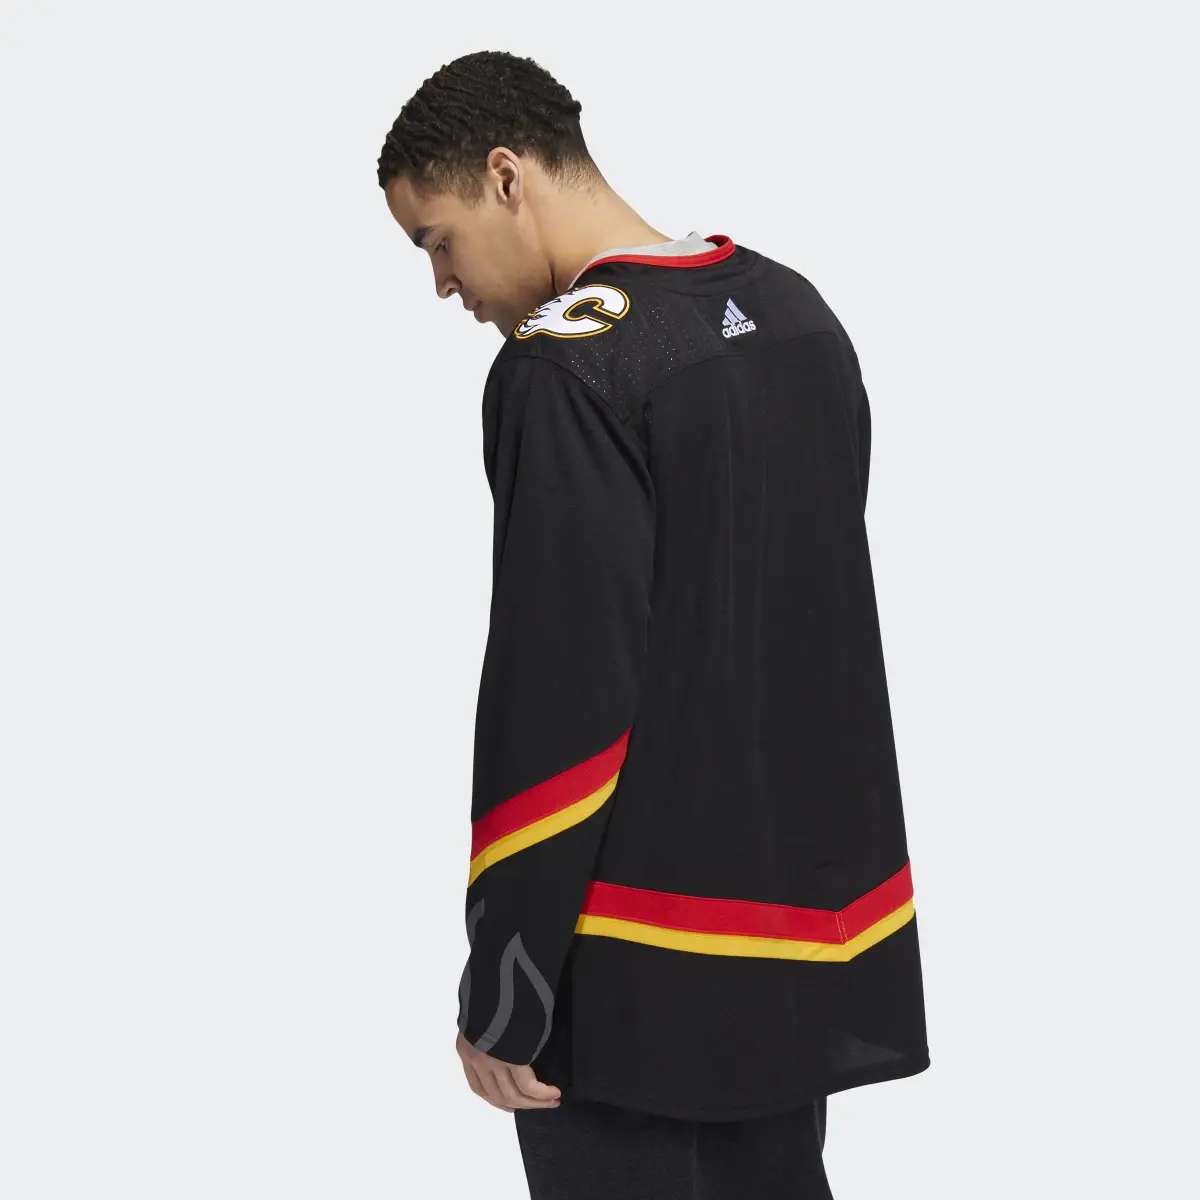 Adidas Flames Third Authentic Jersey. 3